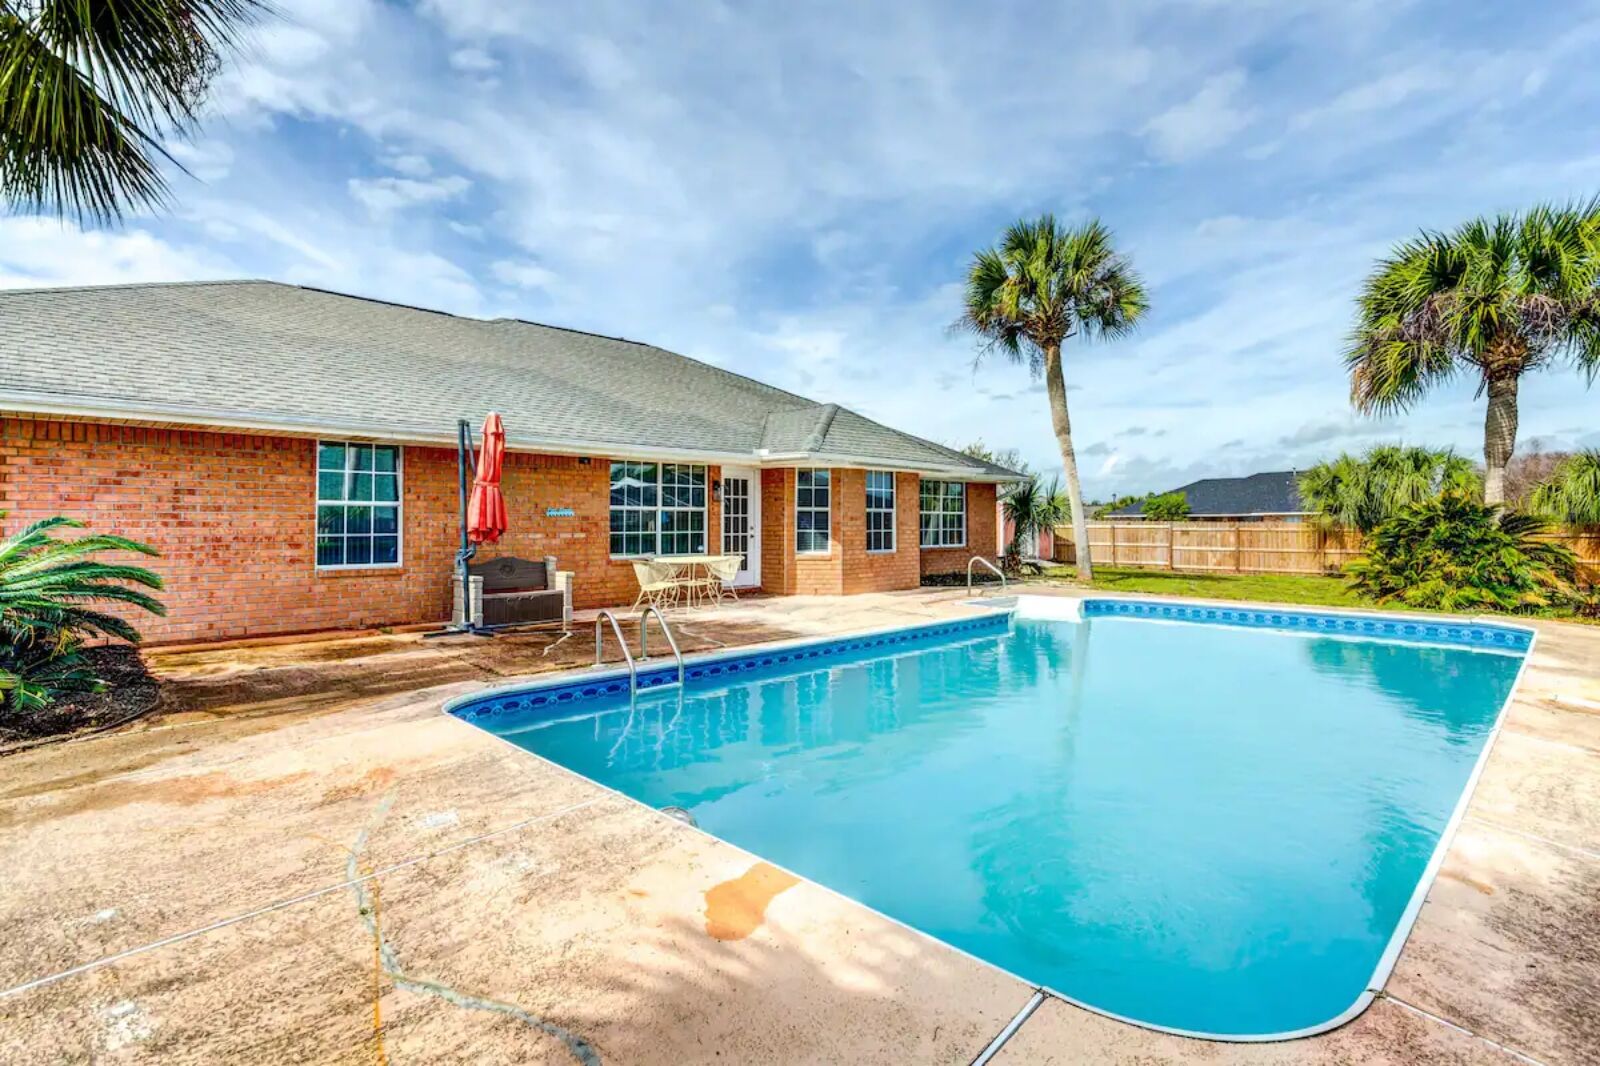 Pool outside Airbnb in Pensacola 